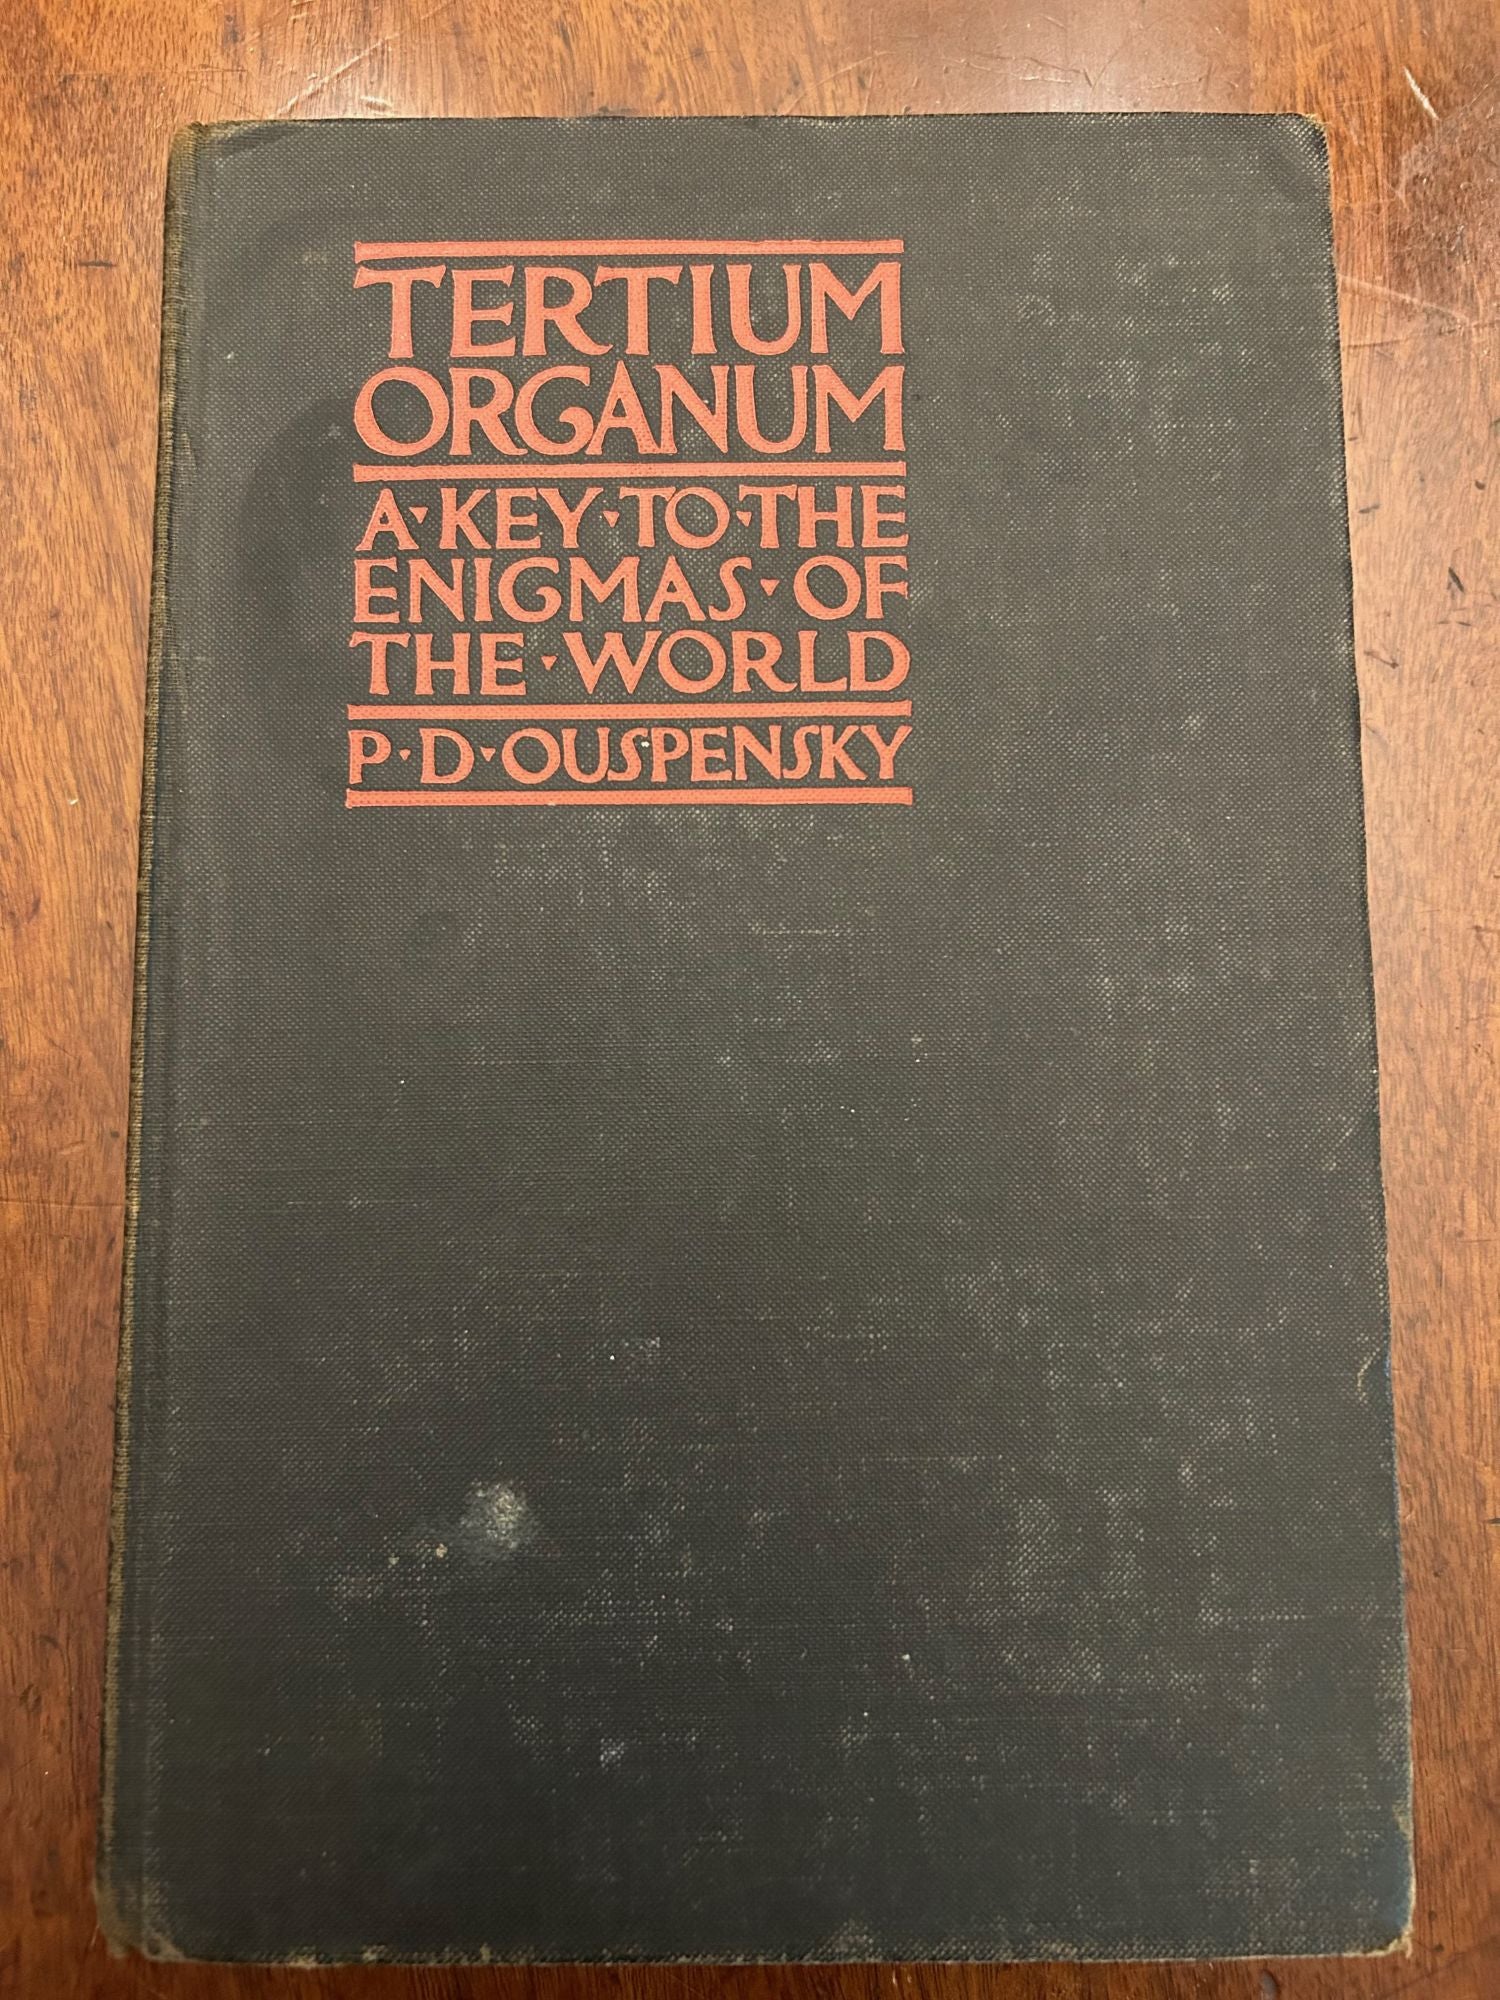 Item #11290 Tertium Organum (The Third Organ of Thought): A Key to the Enigmas of the World. Translated from the Russian by Nicholas Bessaraboff and Claude Bragdon--with an Introduction by Claude Bragdon. Pyotr Demianovich Ouspenskii, known in English as Peter D. Ouspensky.